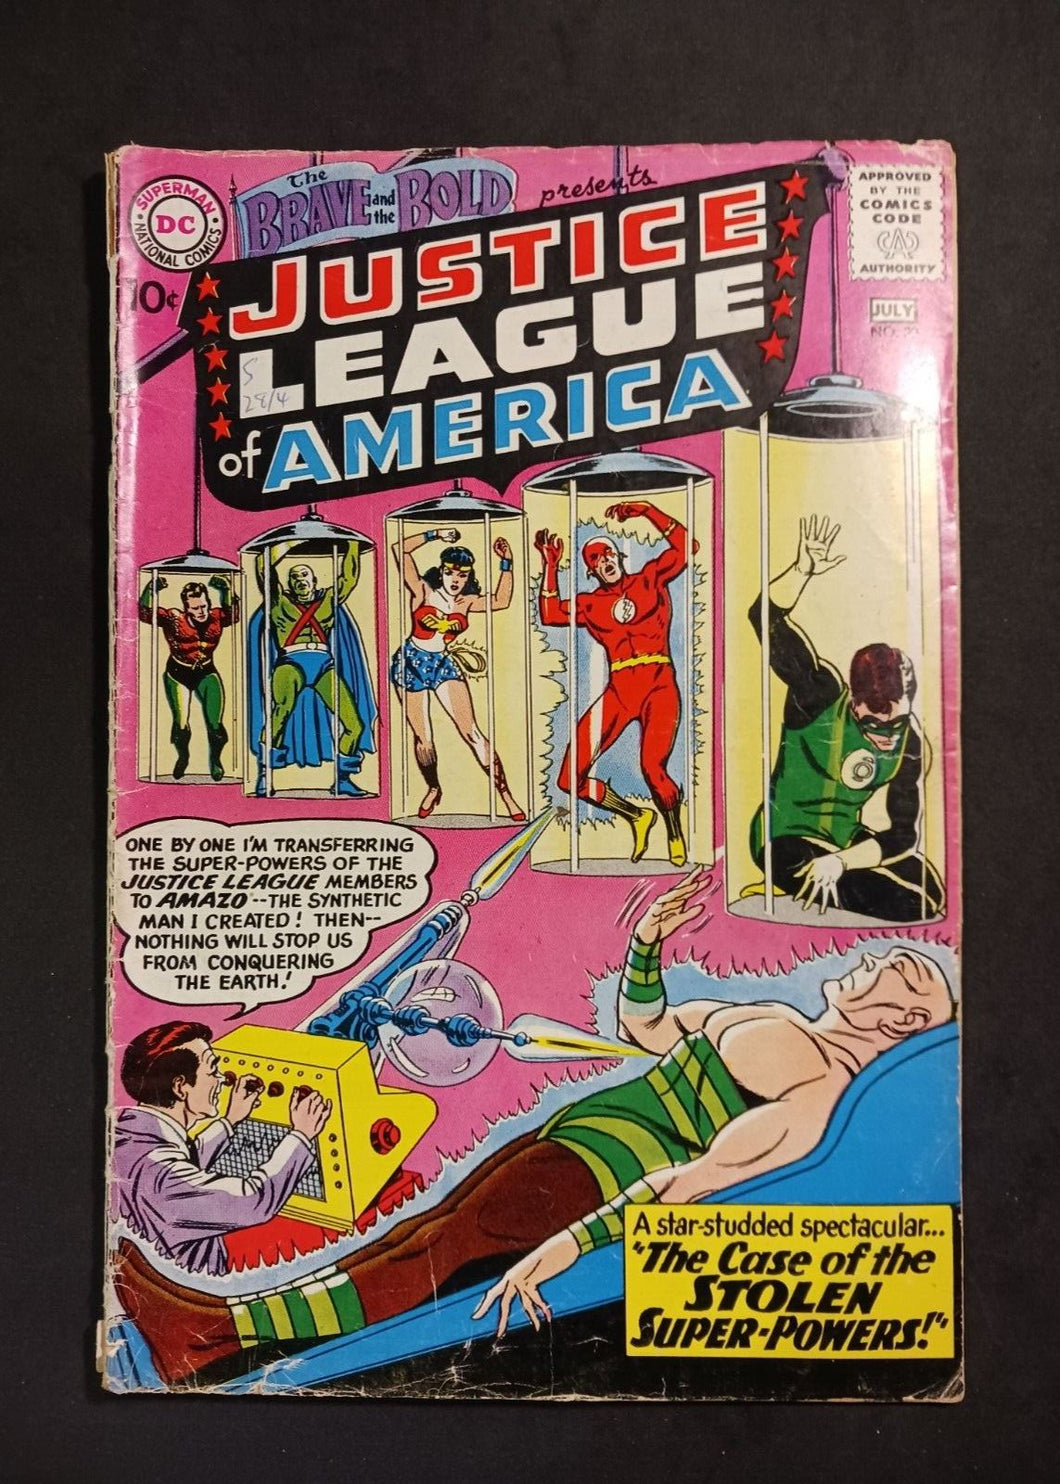 1960 Brave and the Bold Justice League of America #30 DC Comics, G+